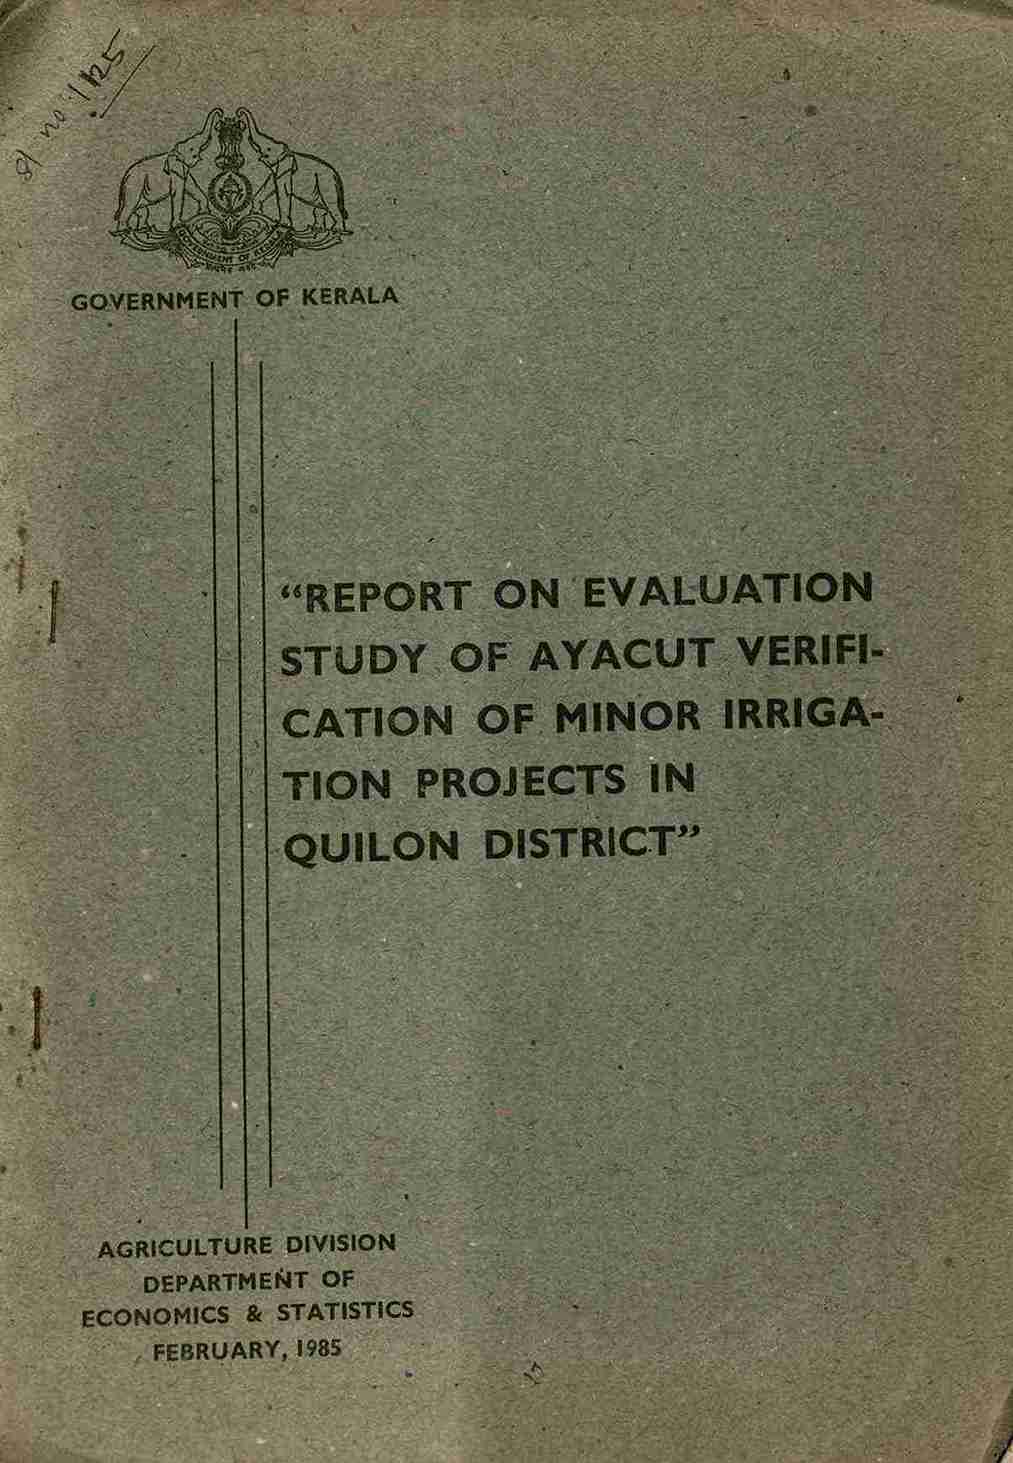 REPORT ON EVALUATION STUDY OF AYACUT VERIFICATION OF MINOR IRRIGATION PROJECTS IN QUILON DISTRICT